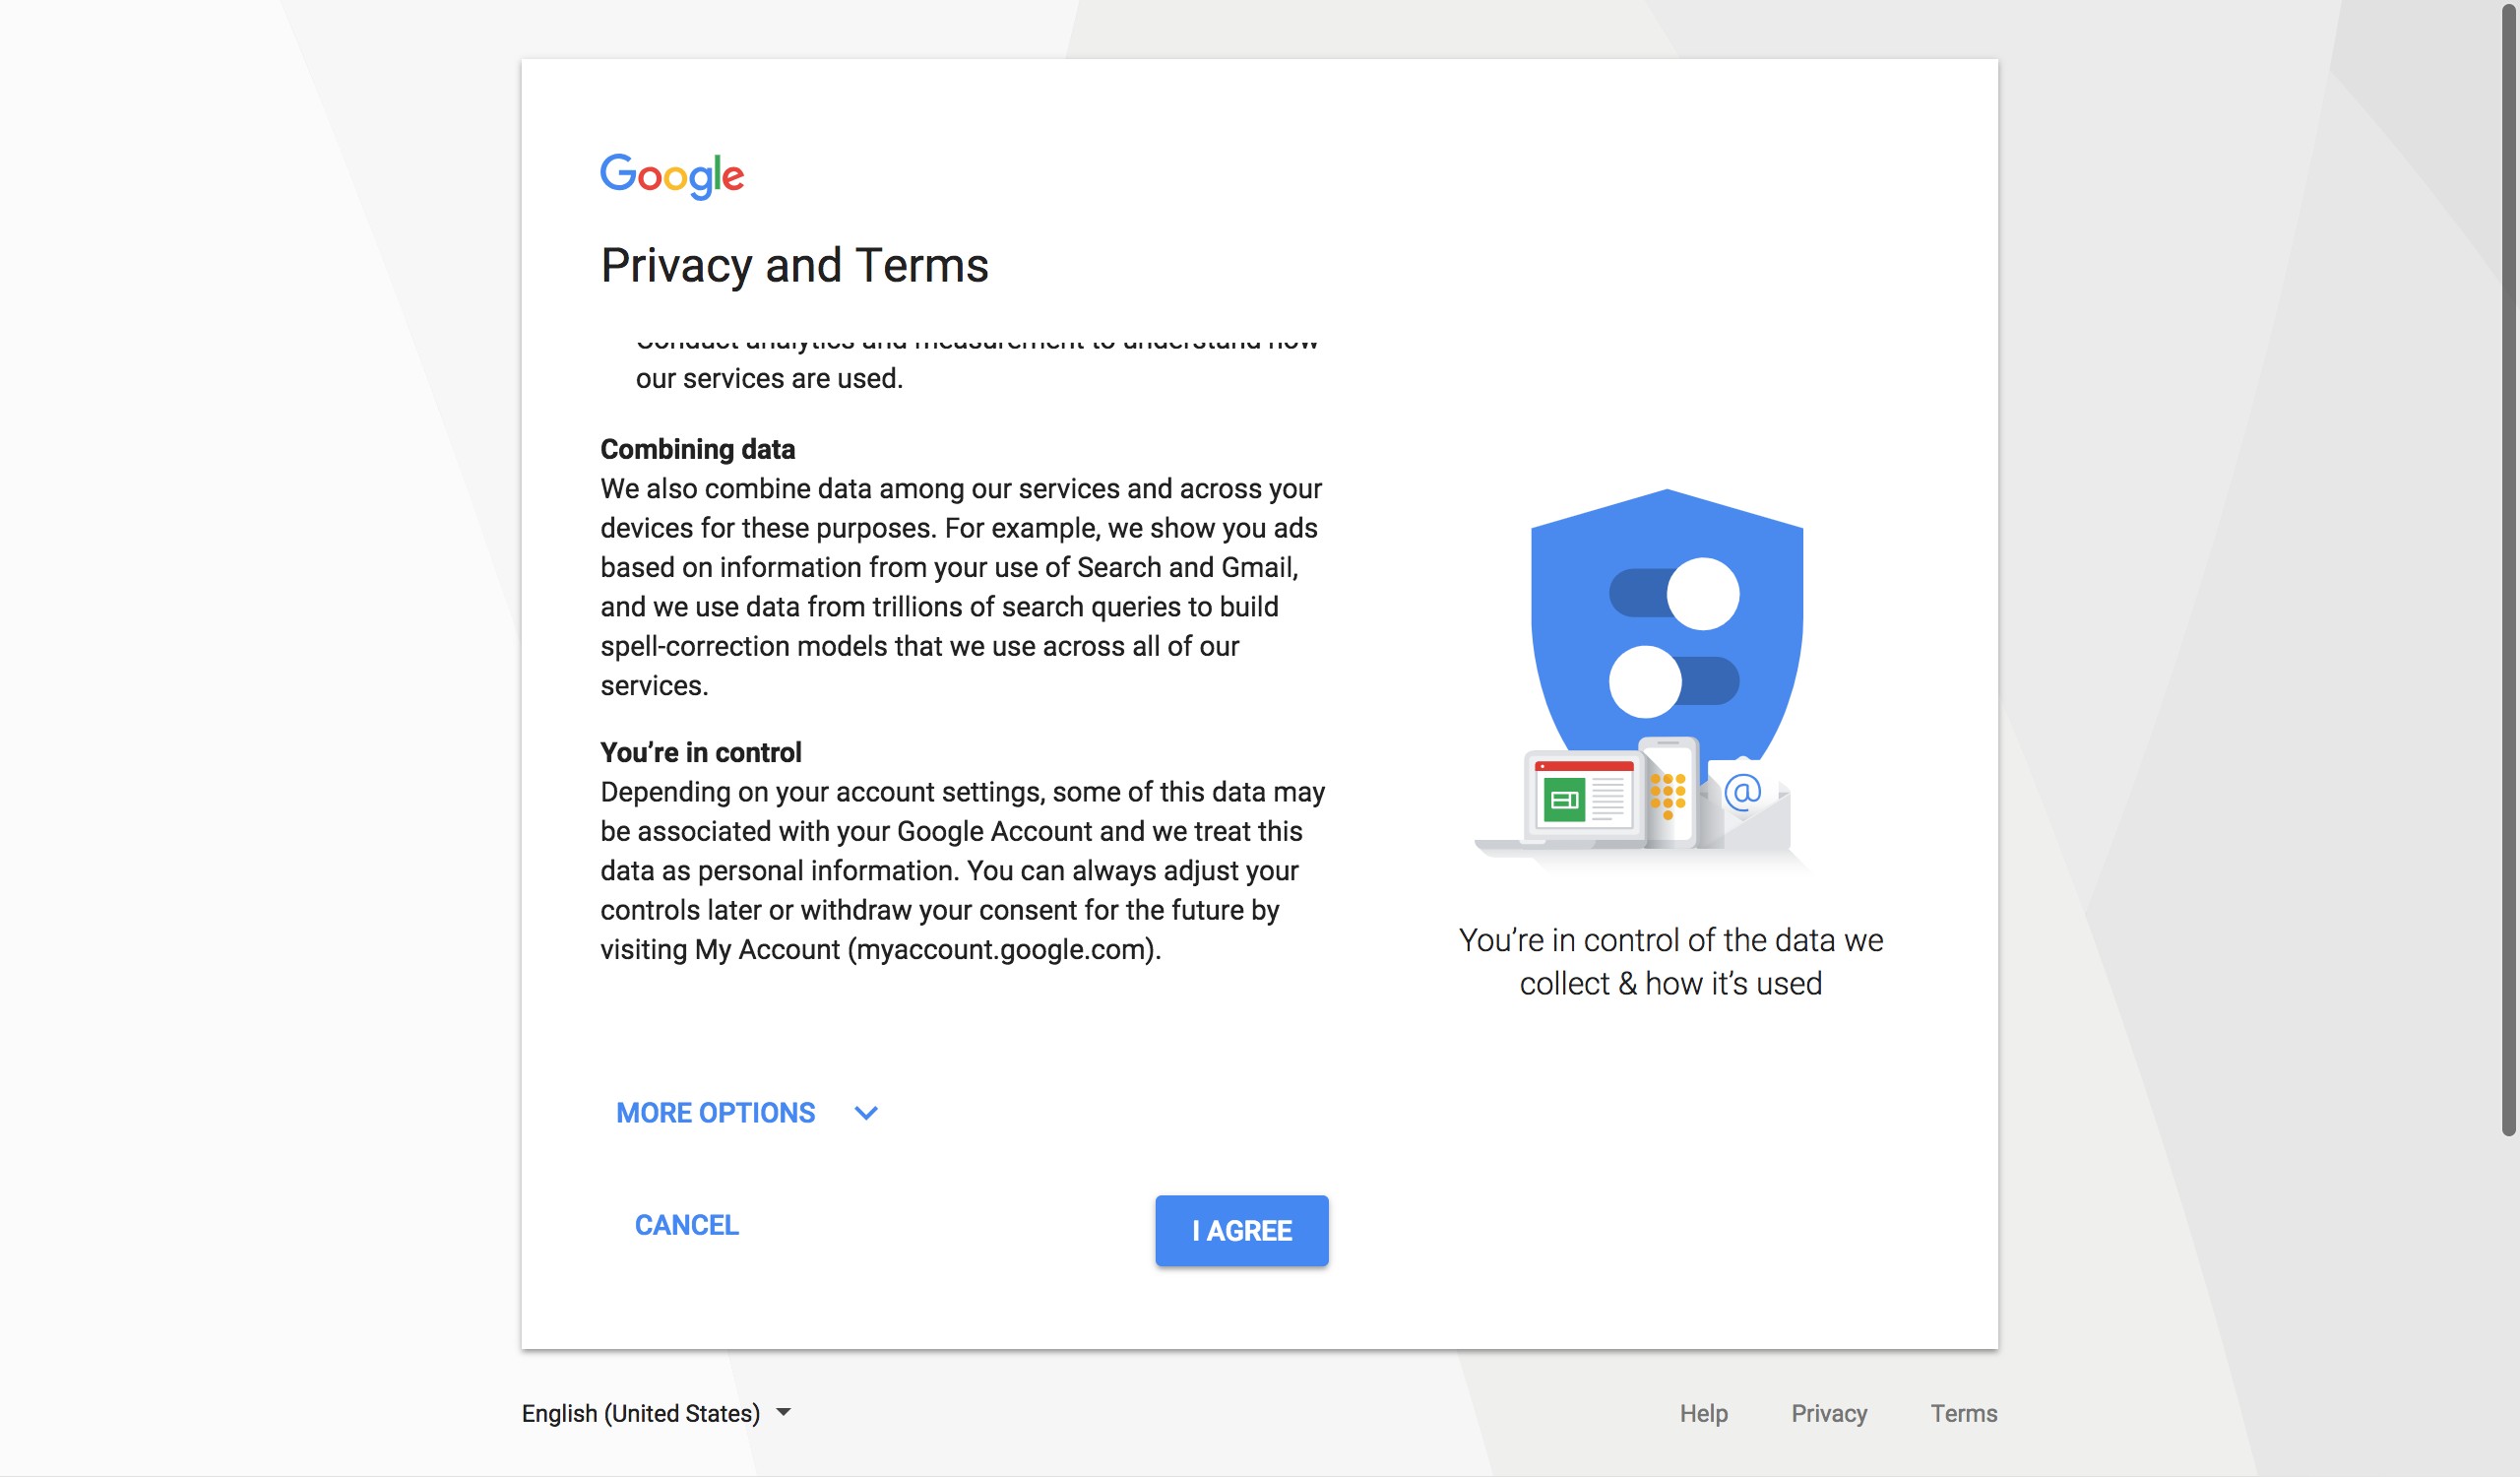 Google Privacy and Terms policy after scrolling